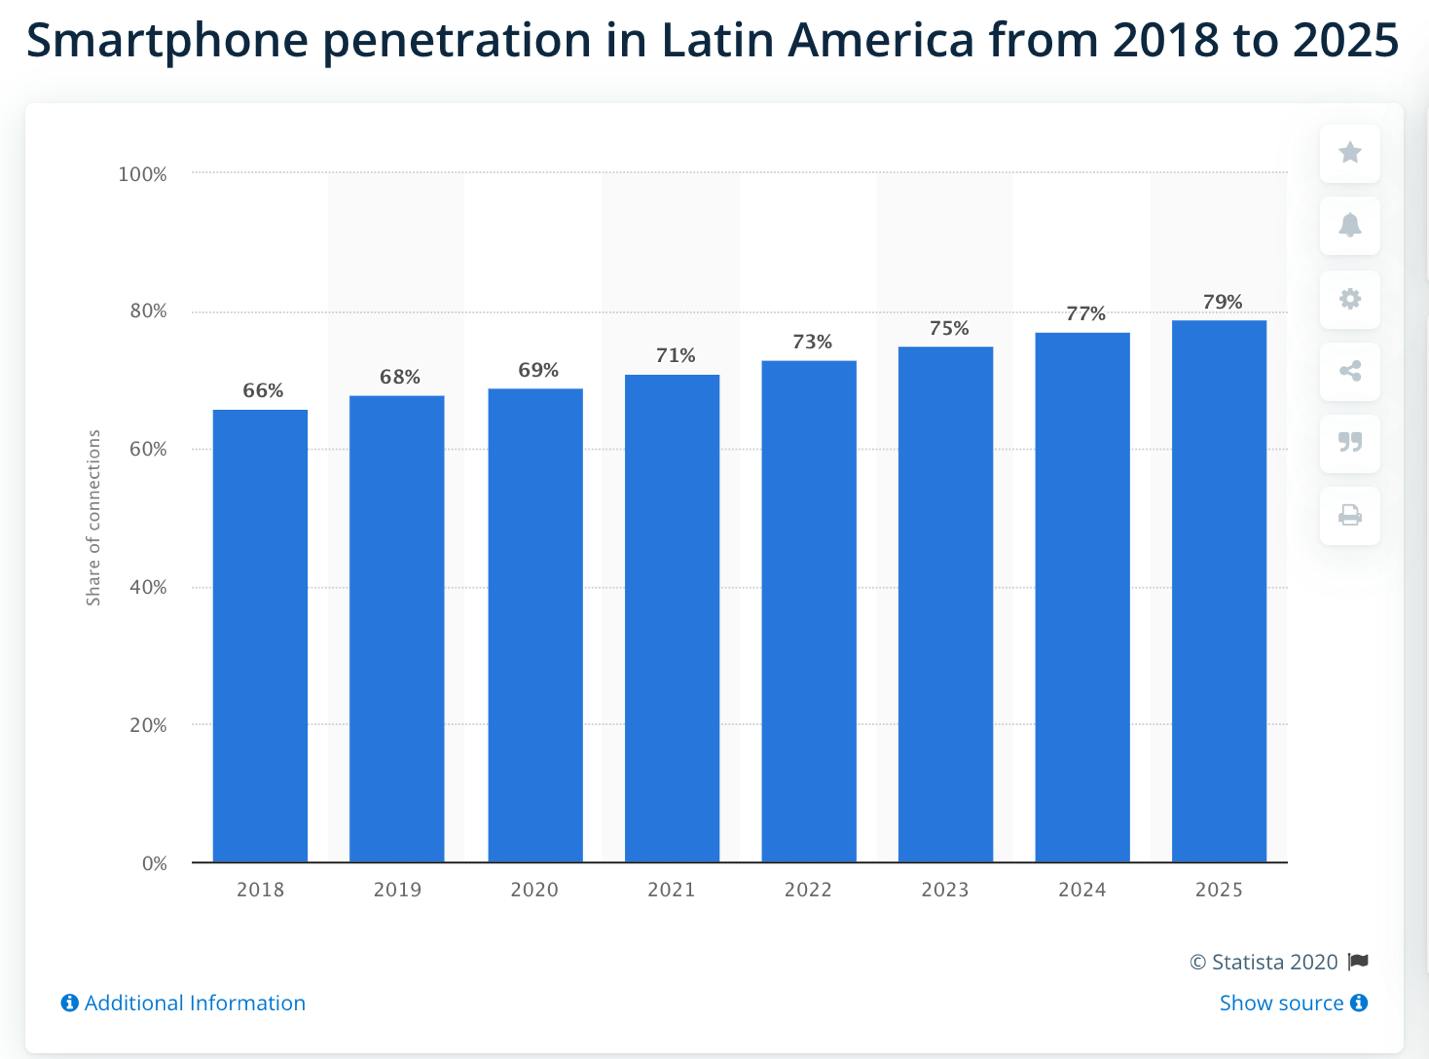 Smartphone penetration in Latin America from 2018 to 2025